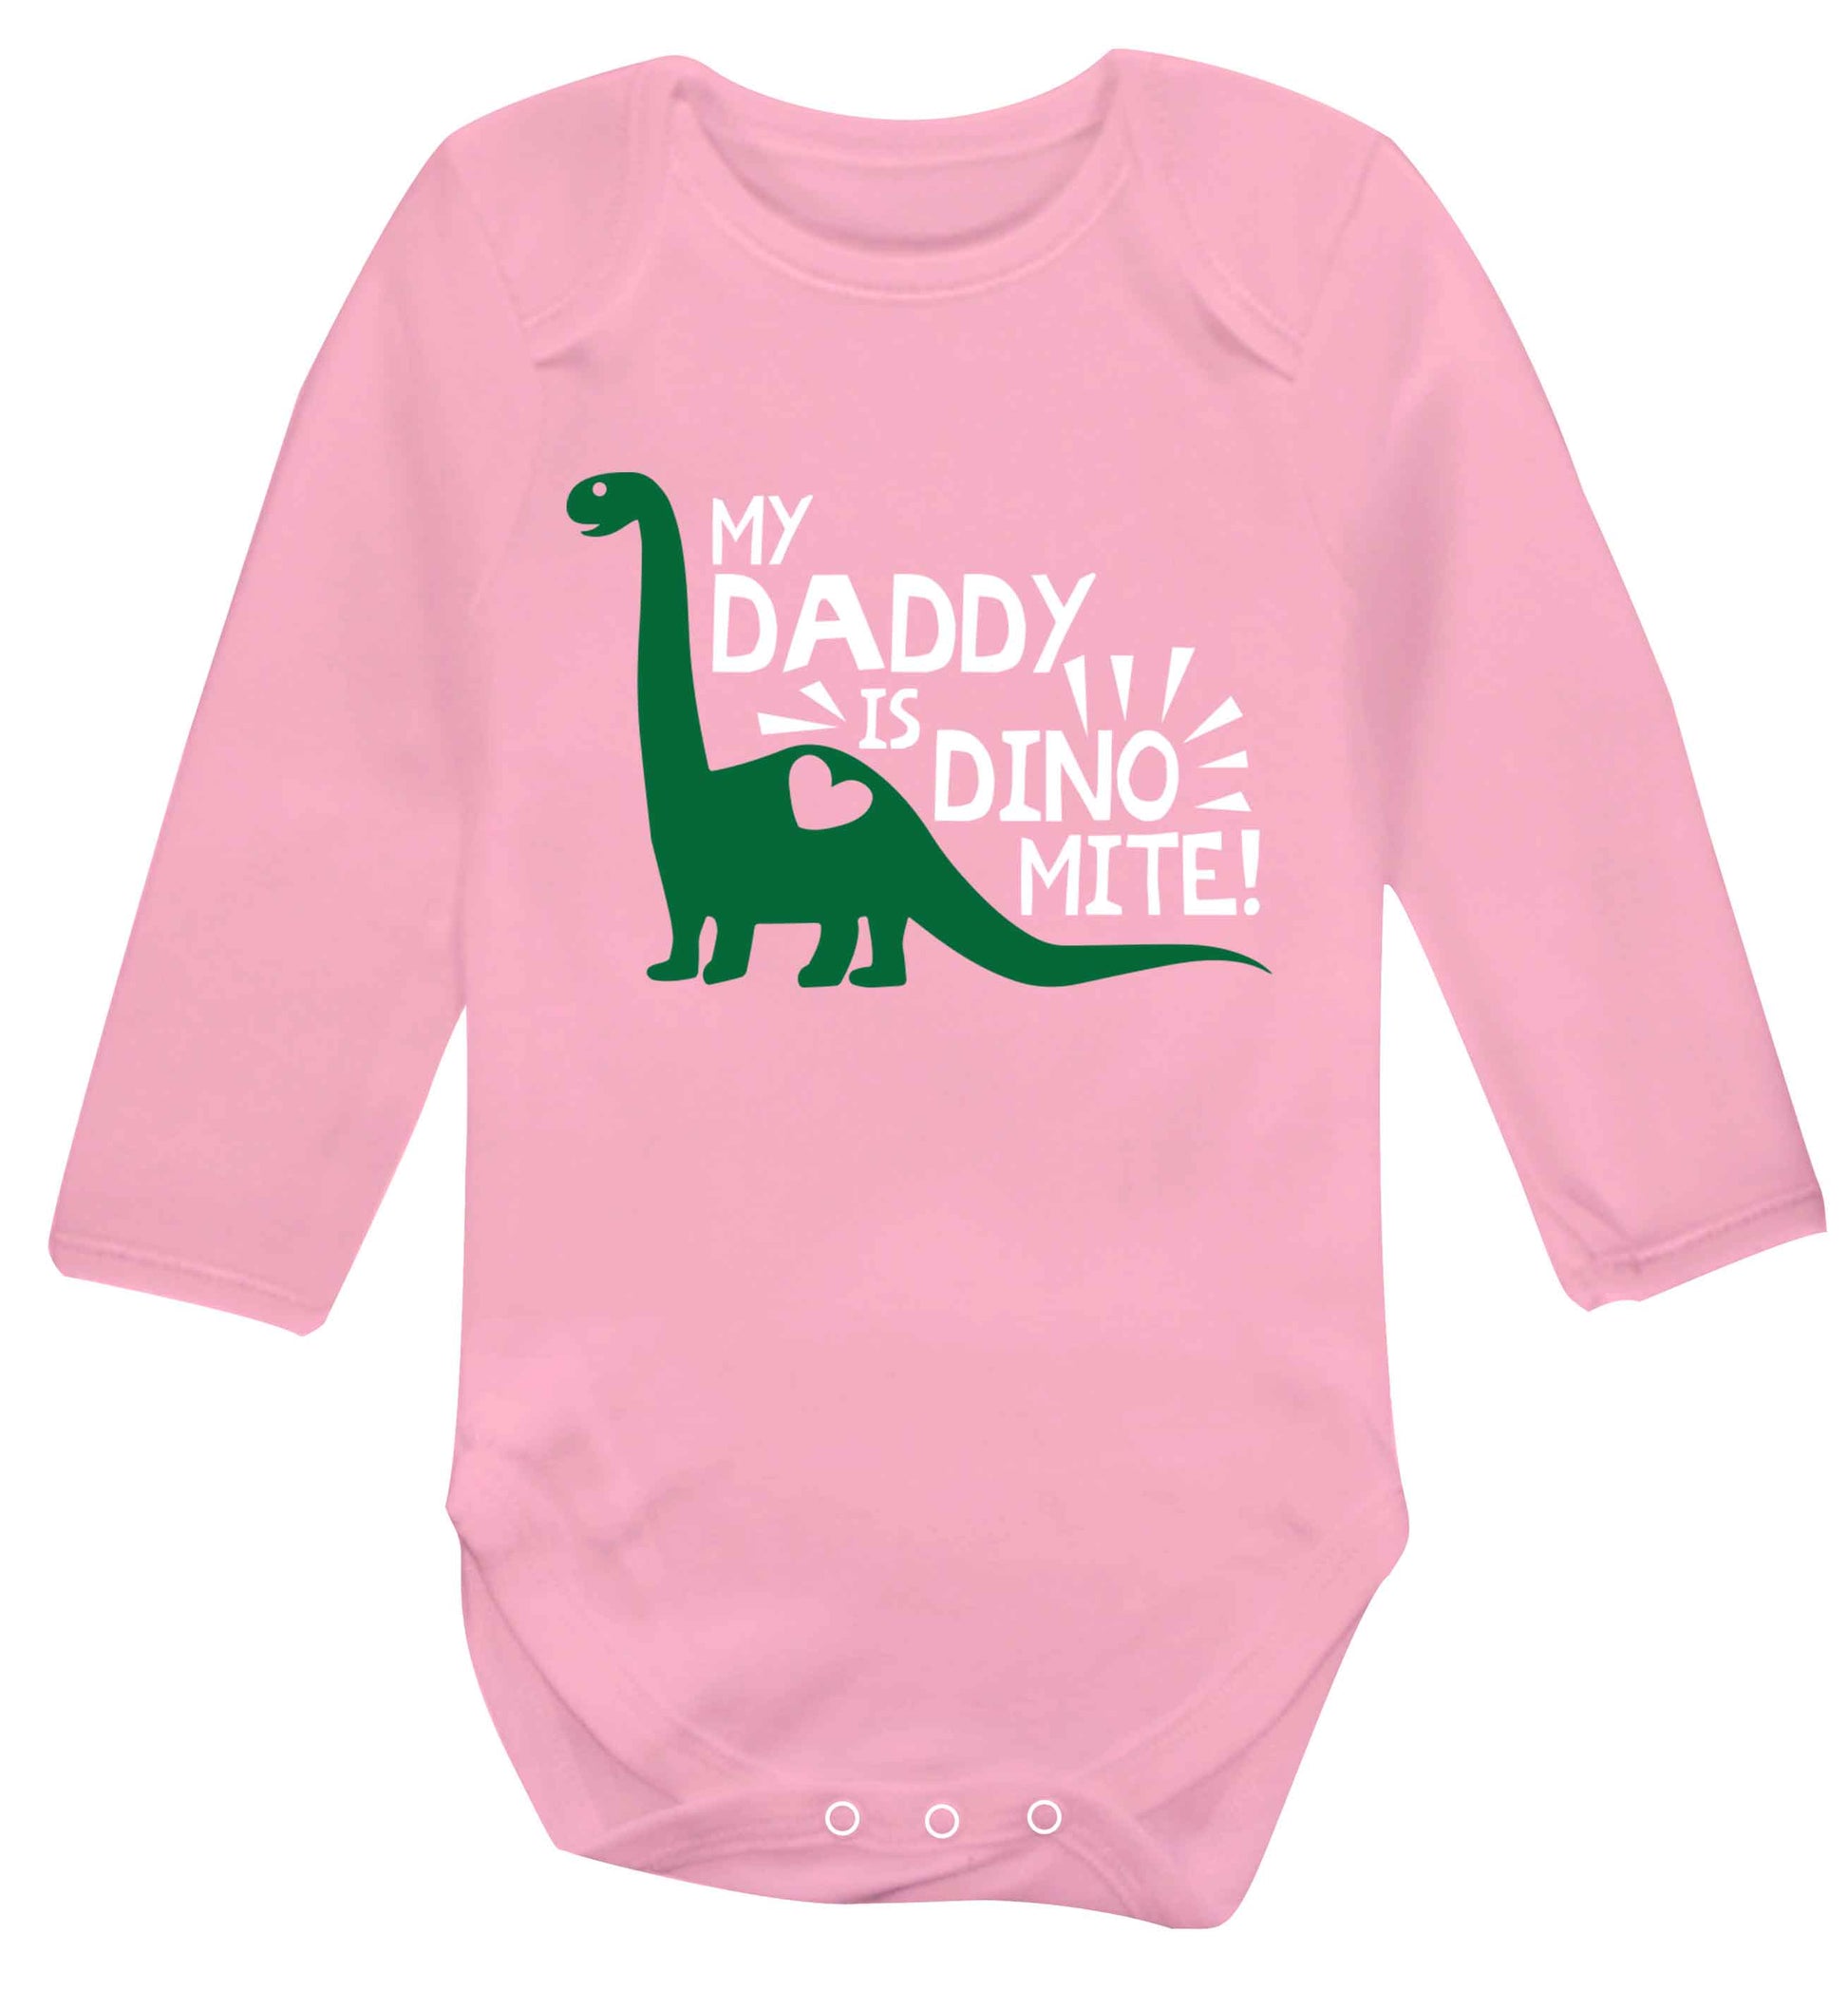 My daddy is dinomite! Baby Vest long sleeved pale pink 6-12 months